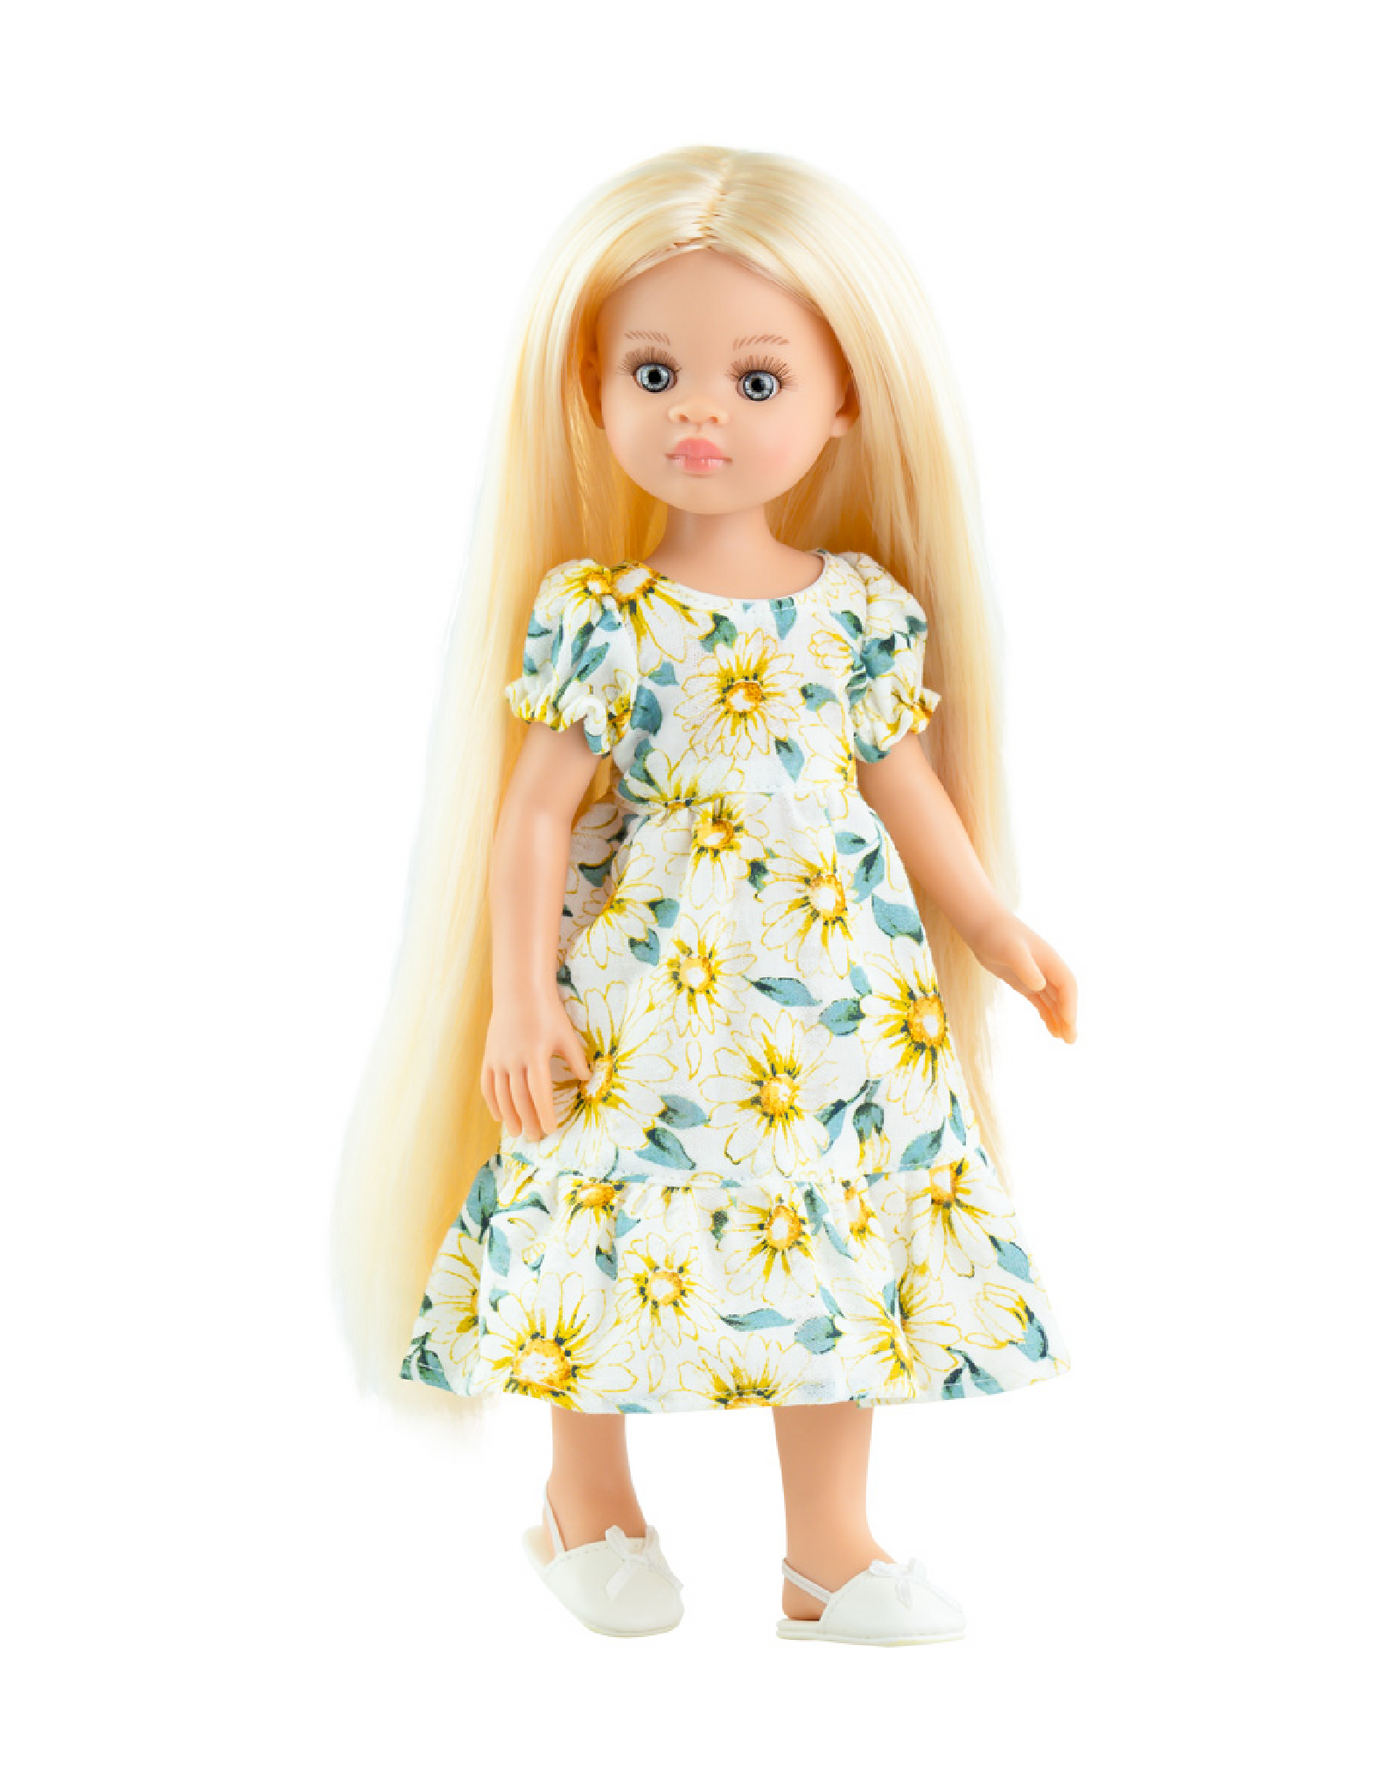 Las Amigas Doll - Laura white and yellow flower dress - Paola Reina